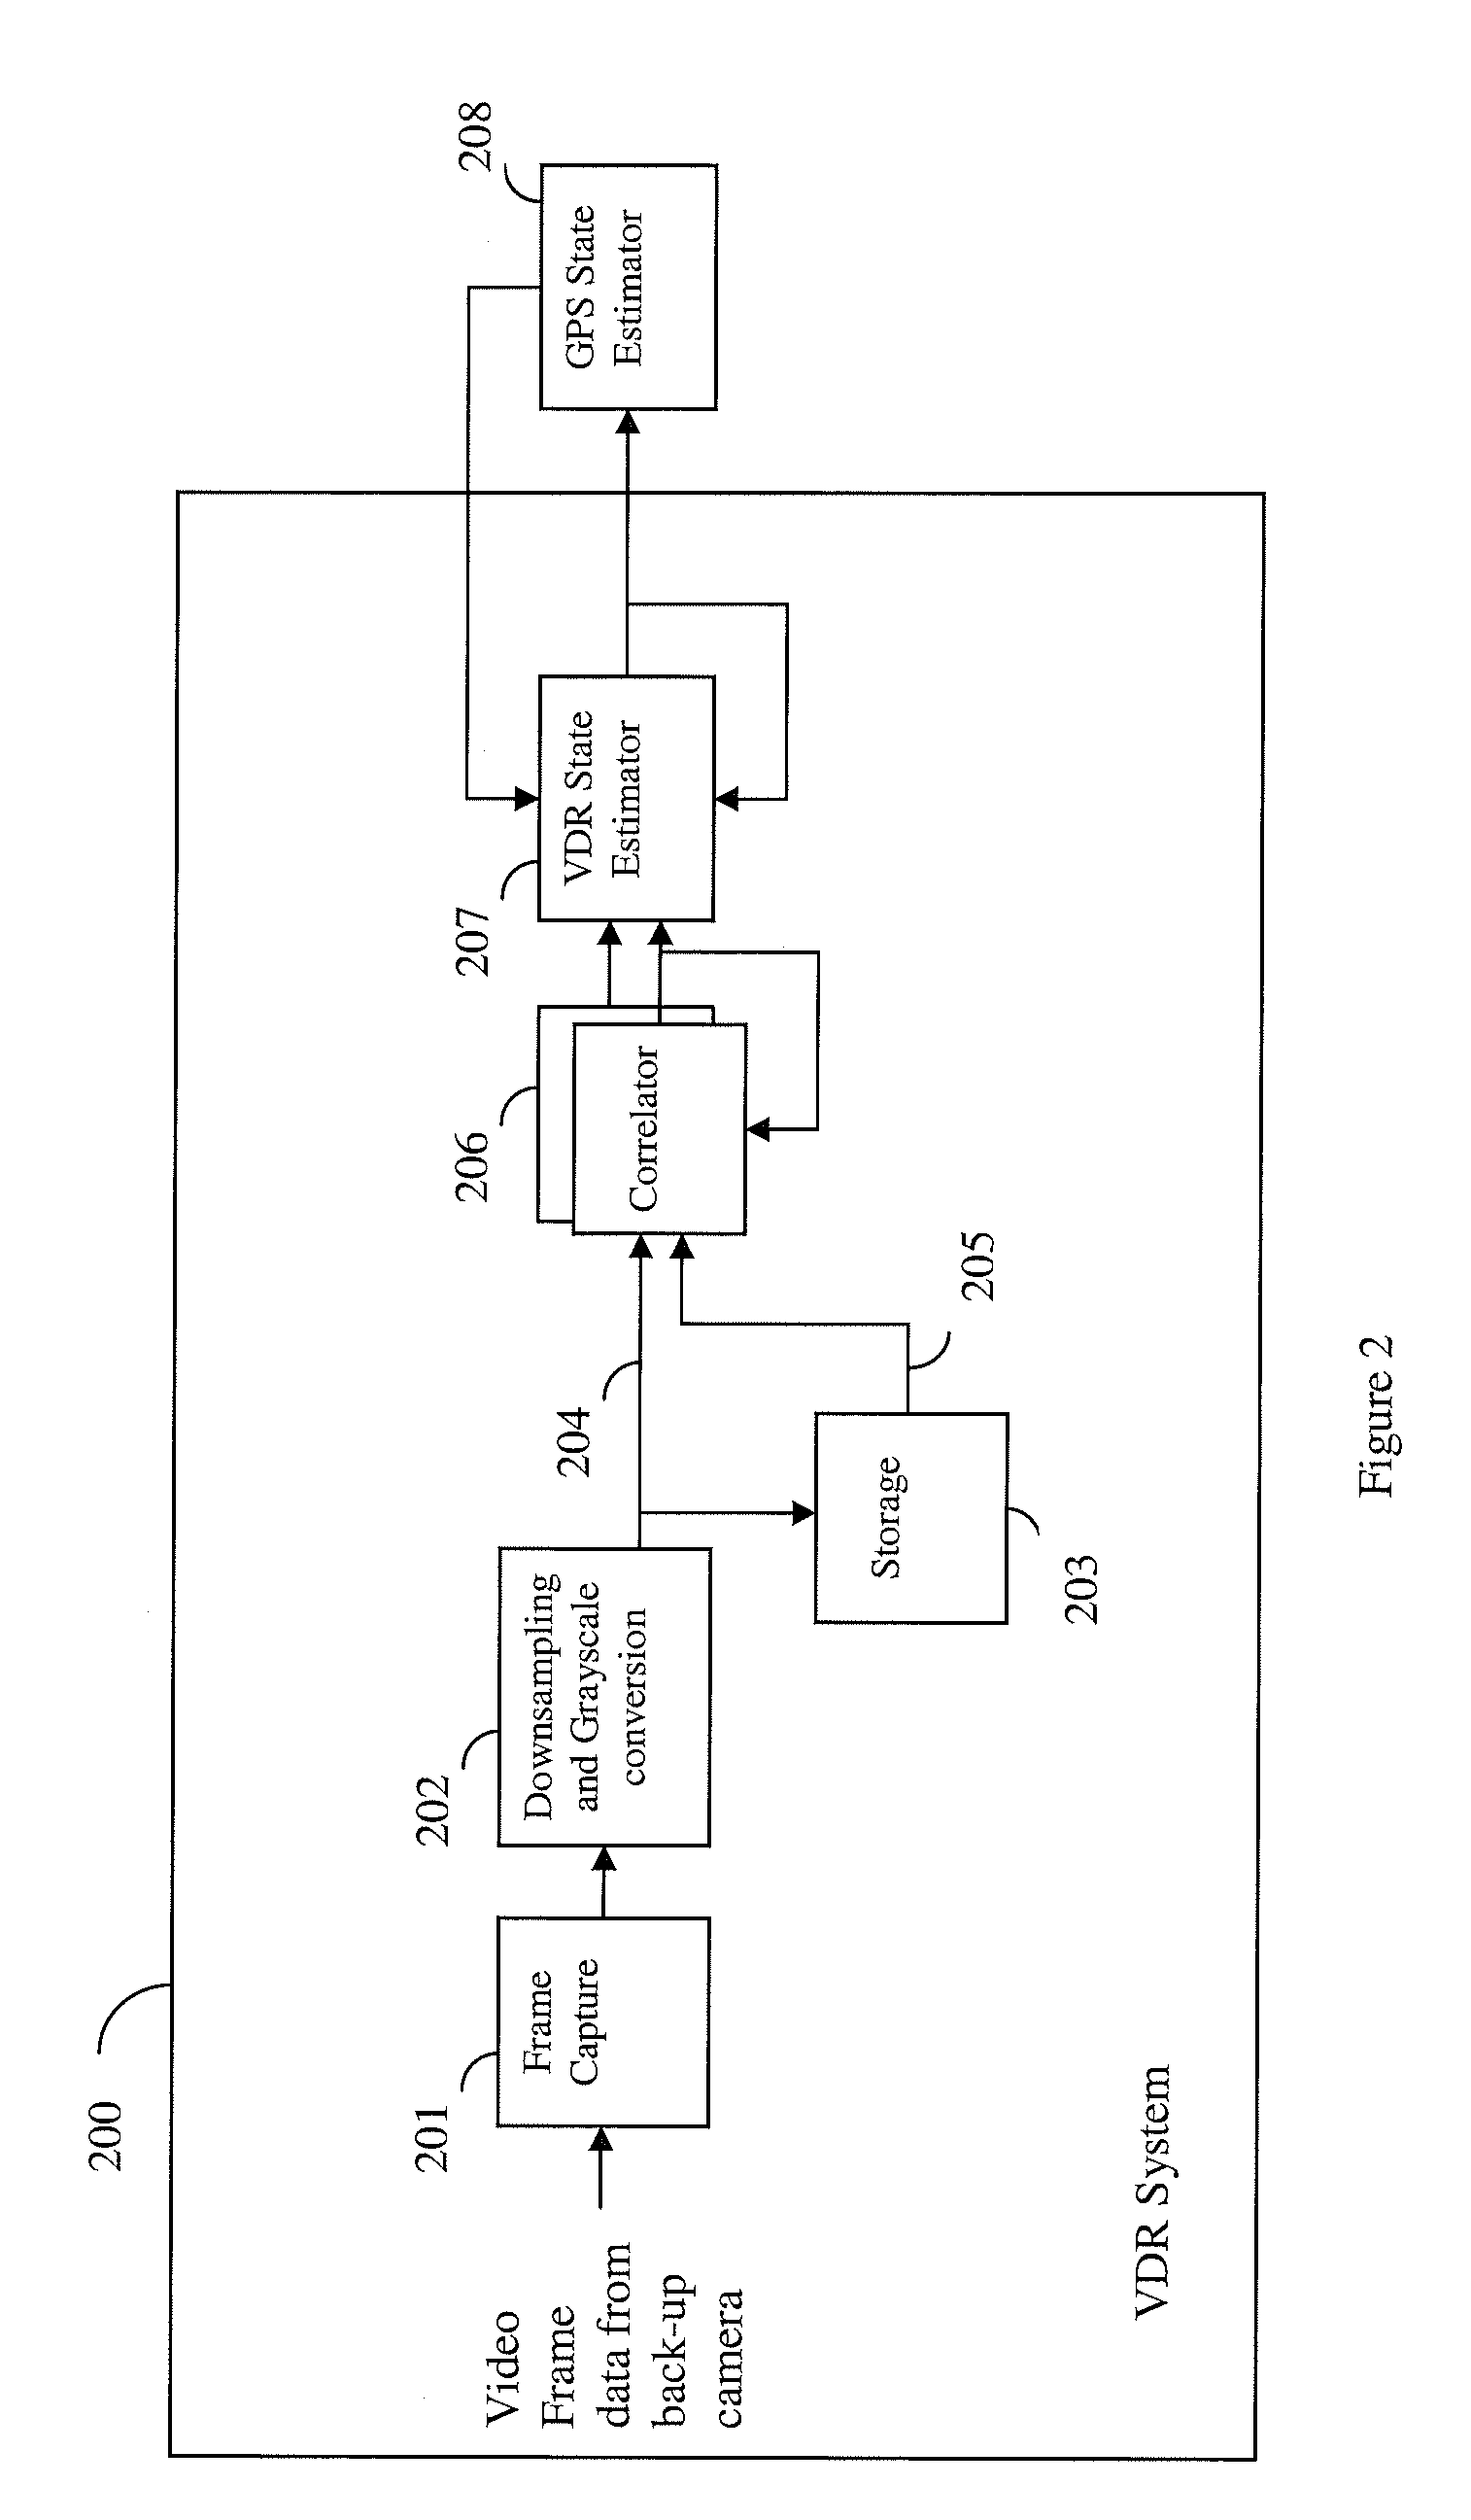 System and method for use of a vehicle back-up camera as a dead-reckoning sensor